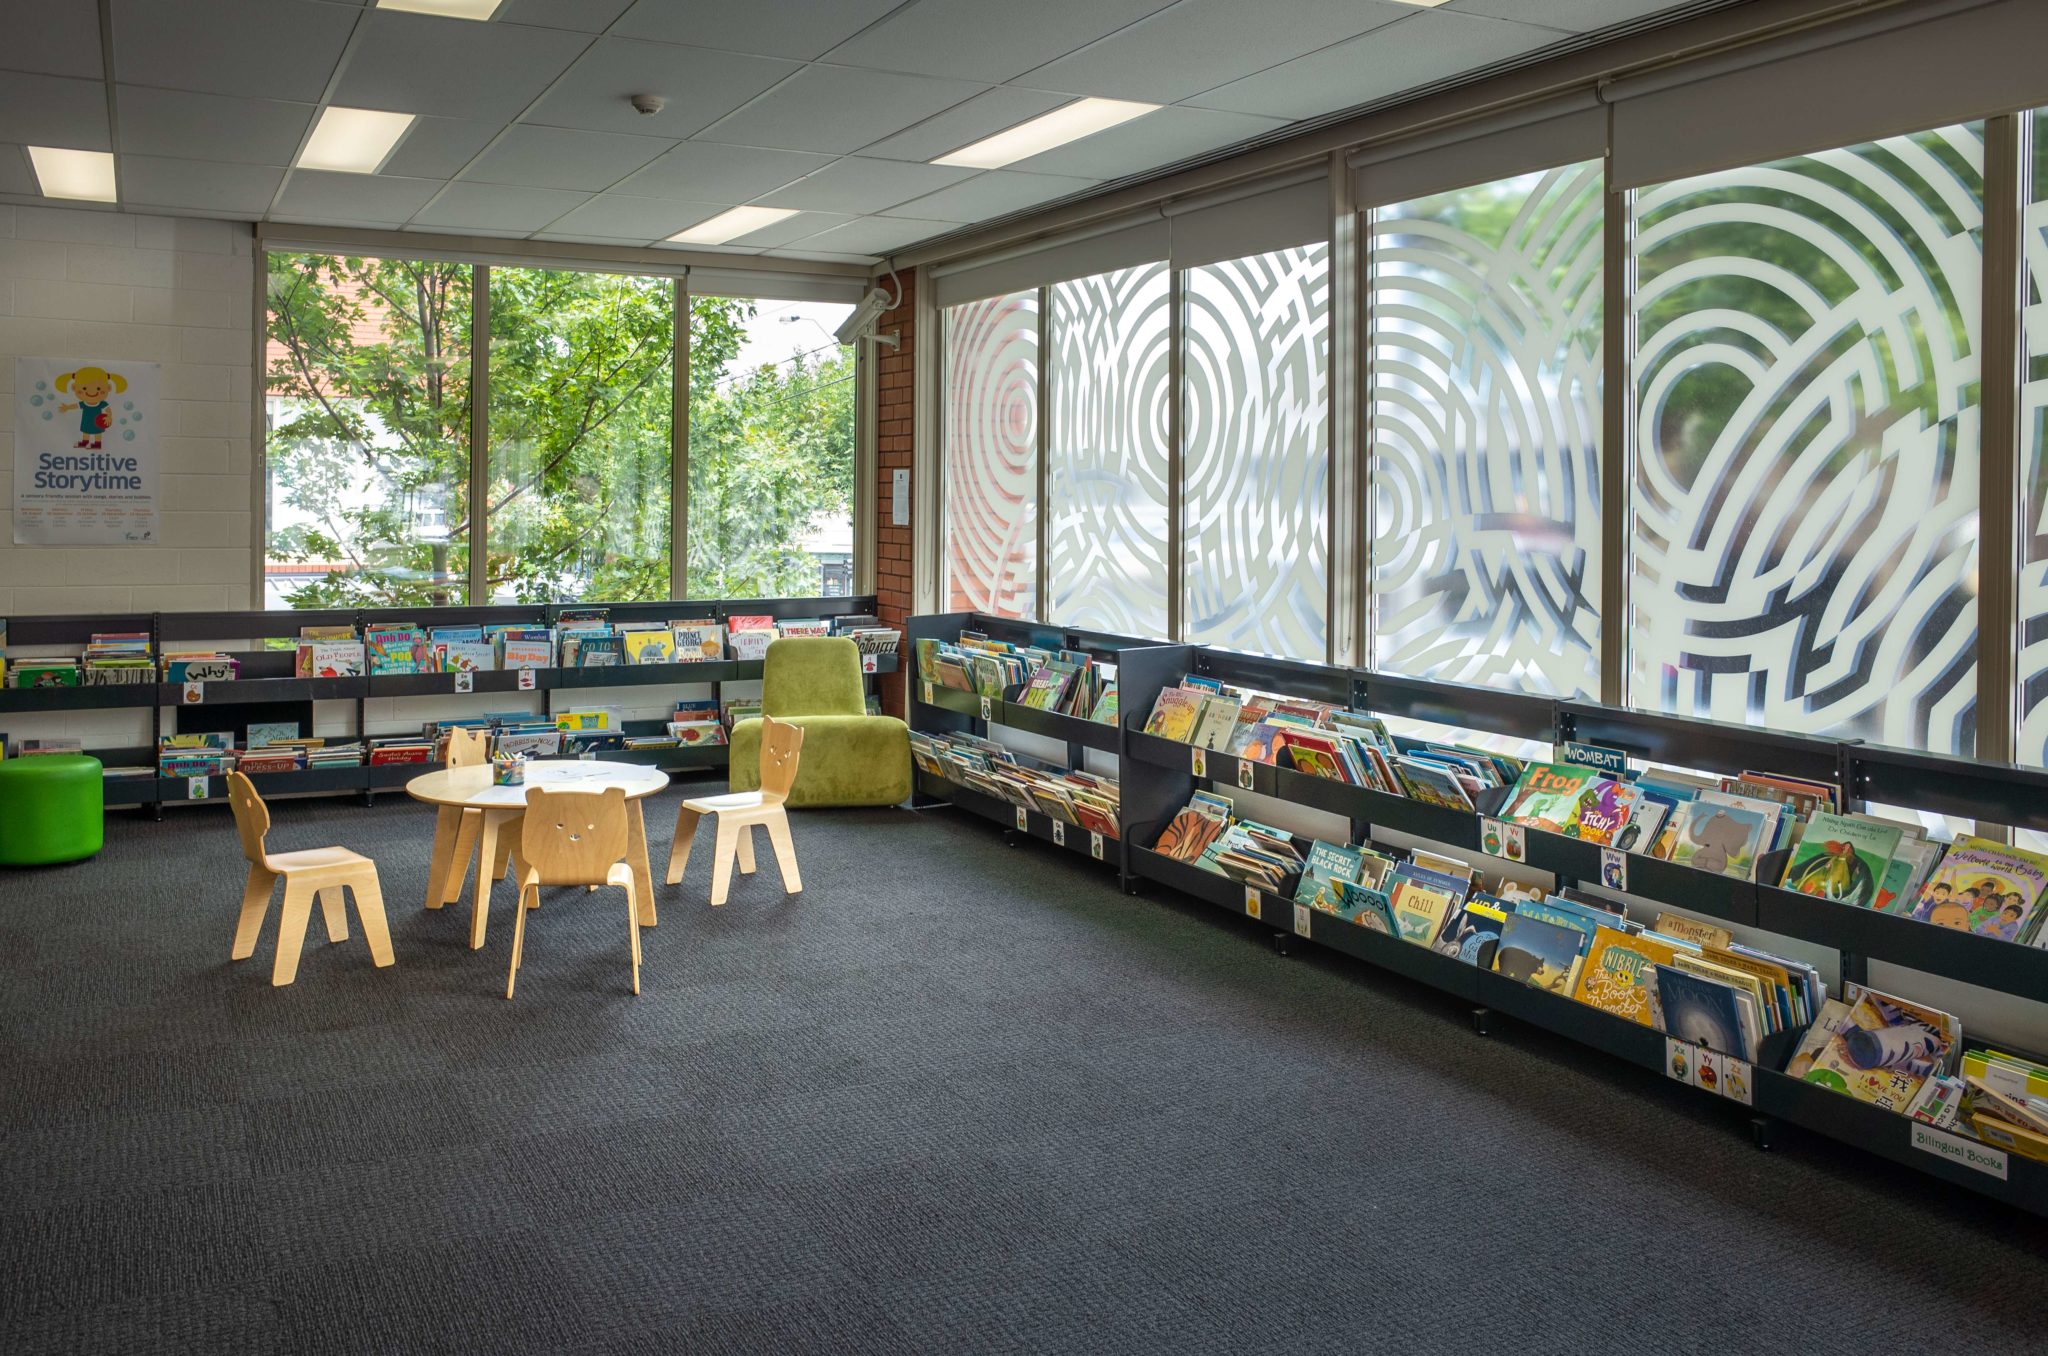 Libraries are at risk of pest infestation